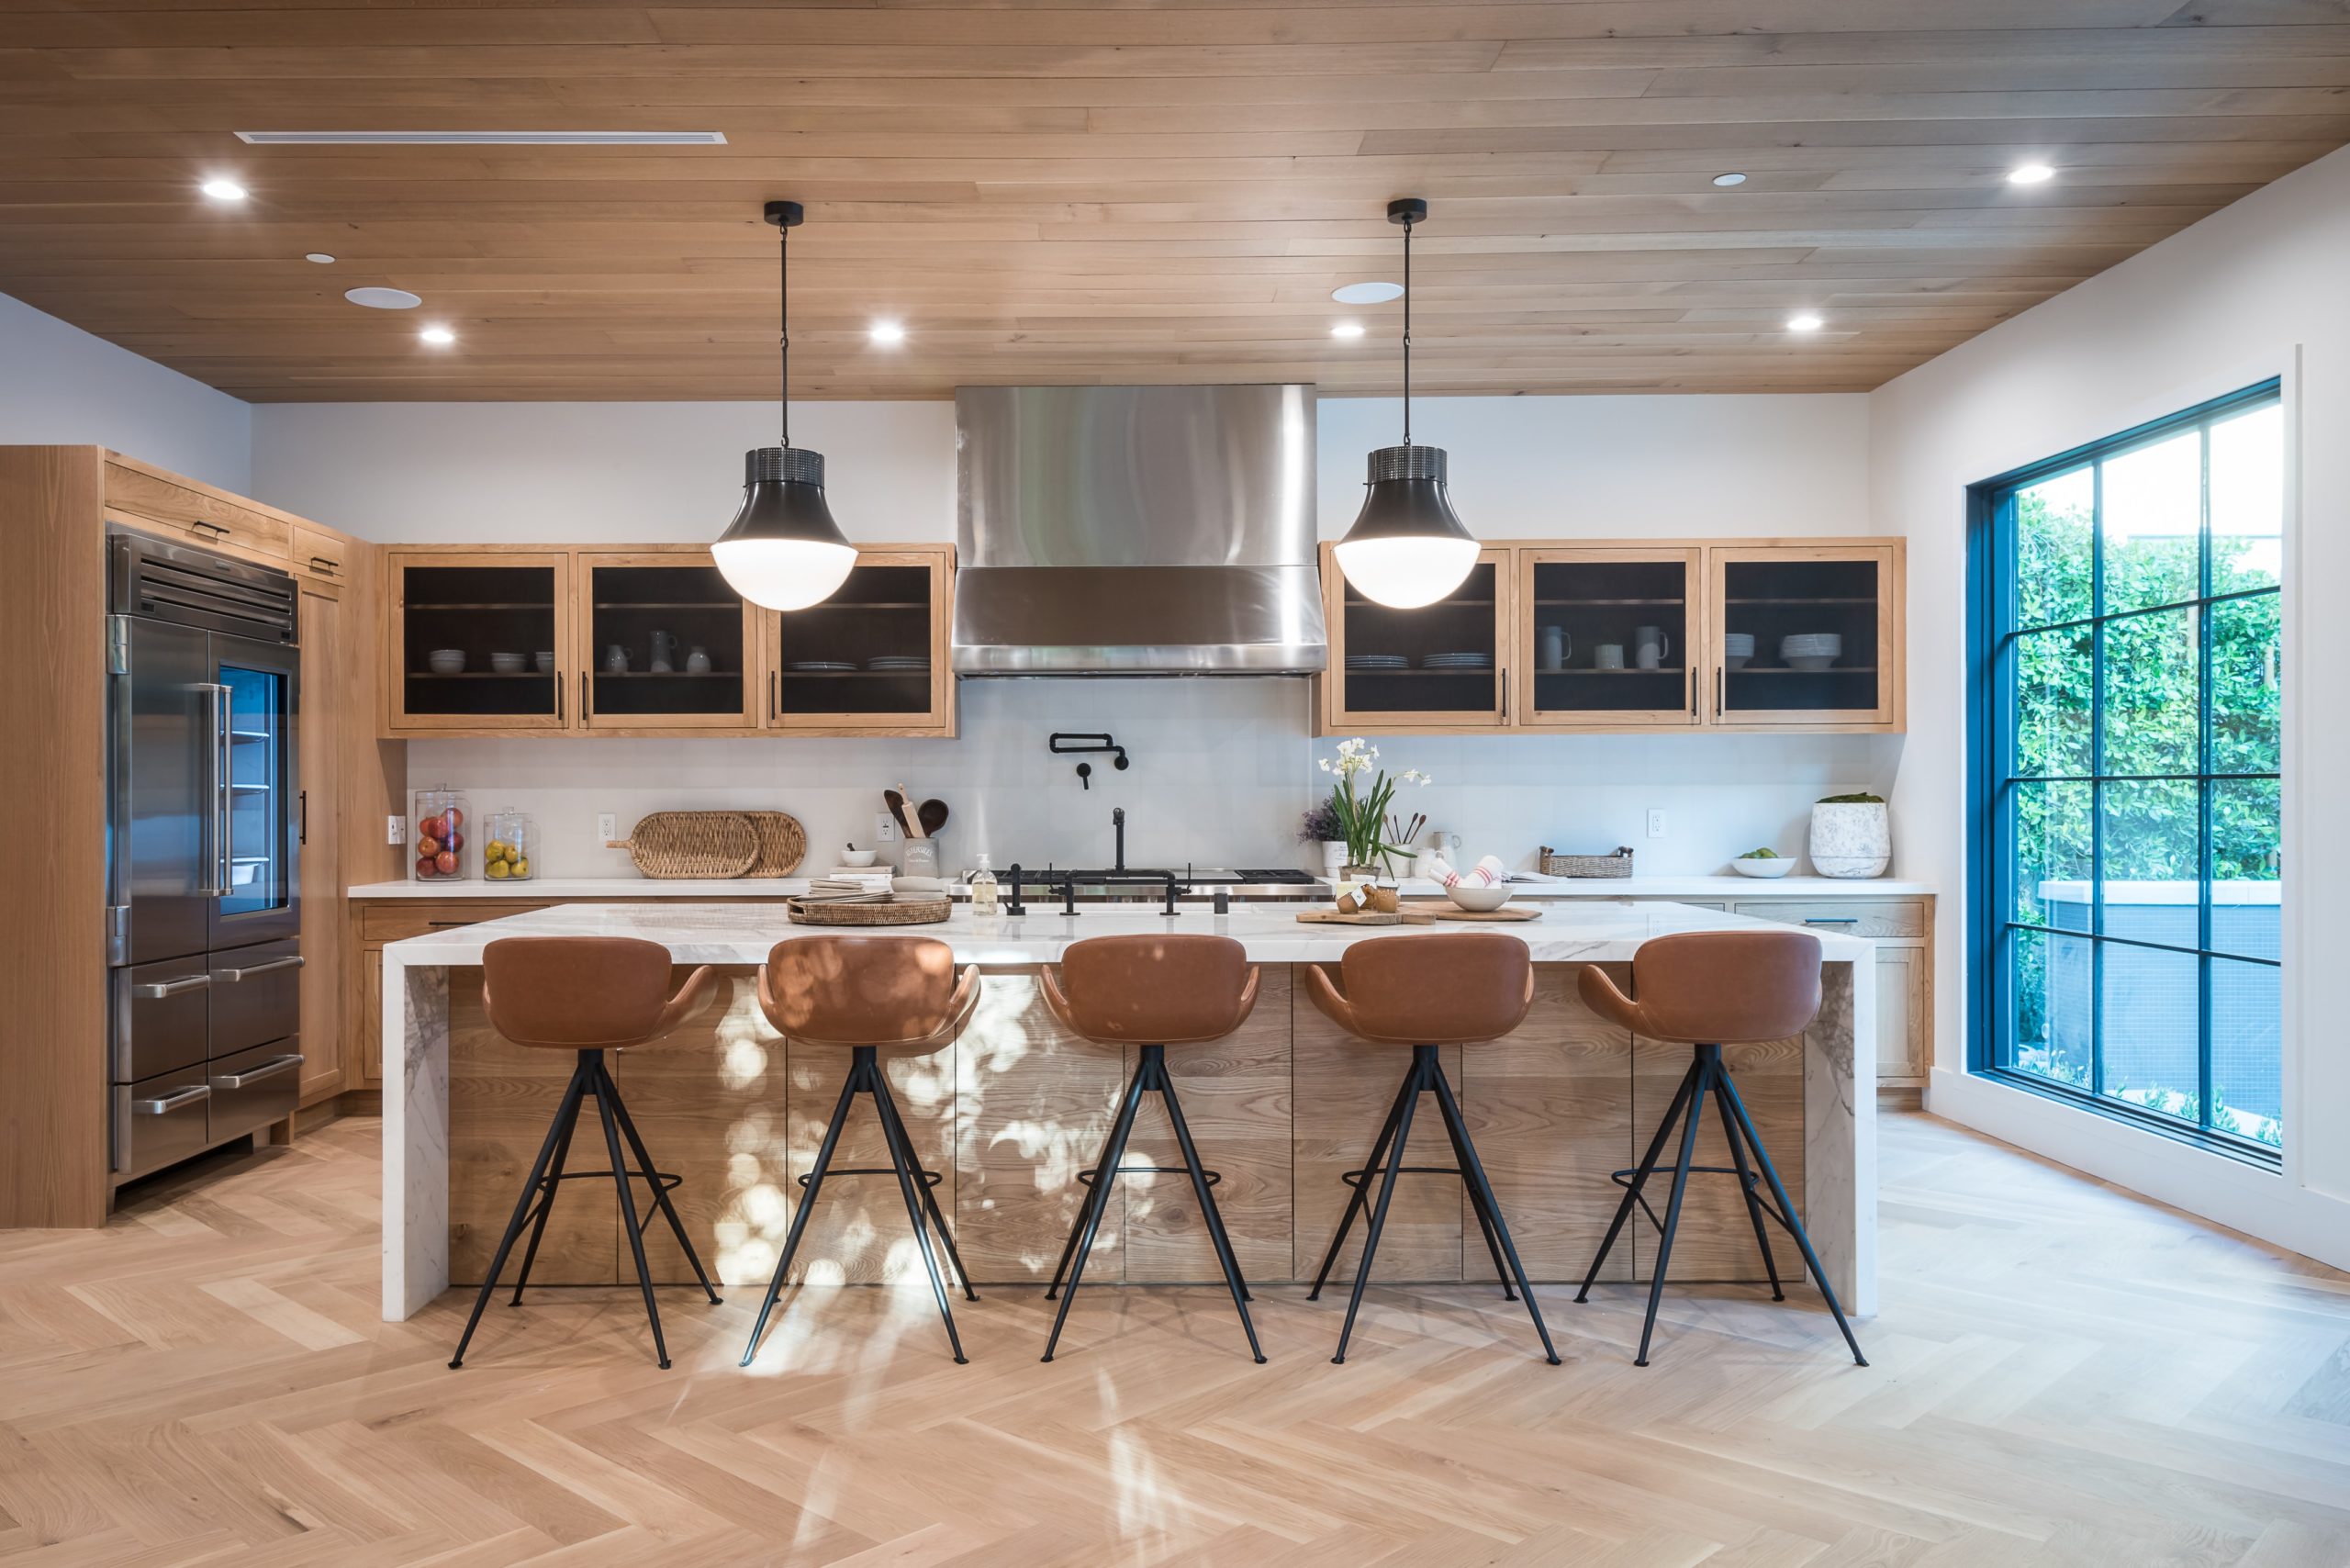 Kitchen with wooden ceiling, floor and shelving